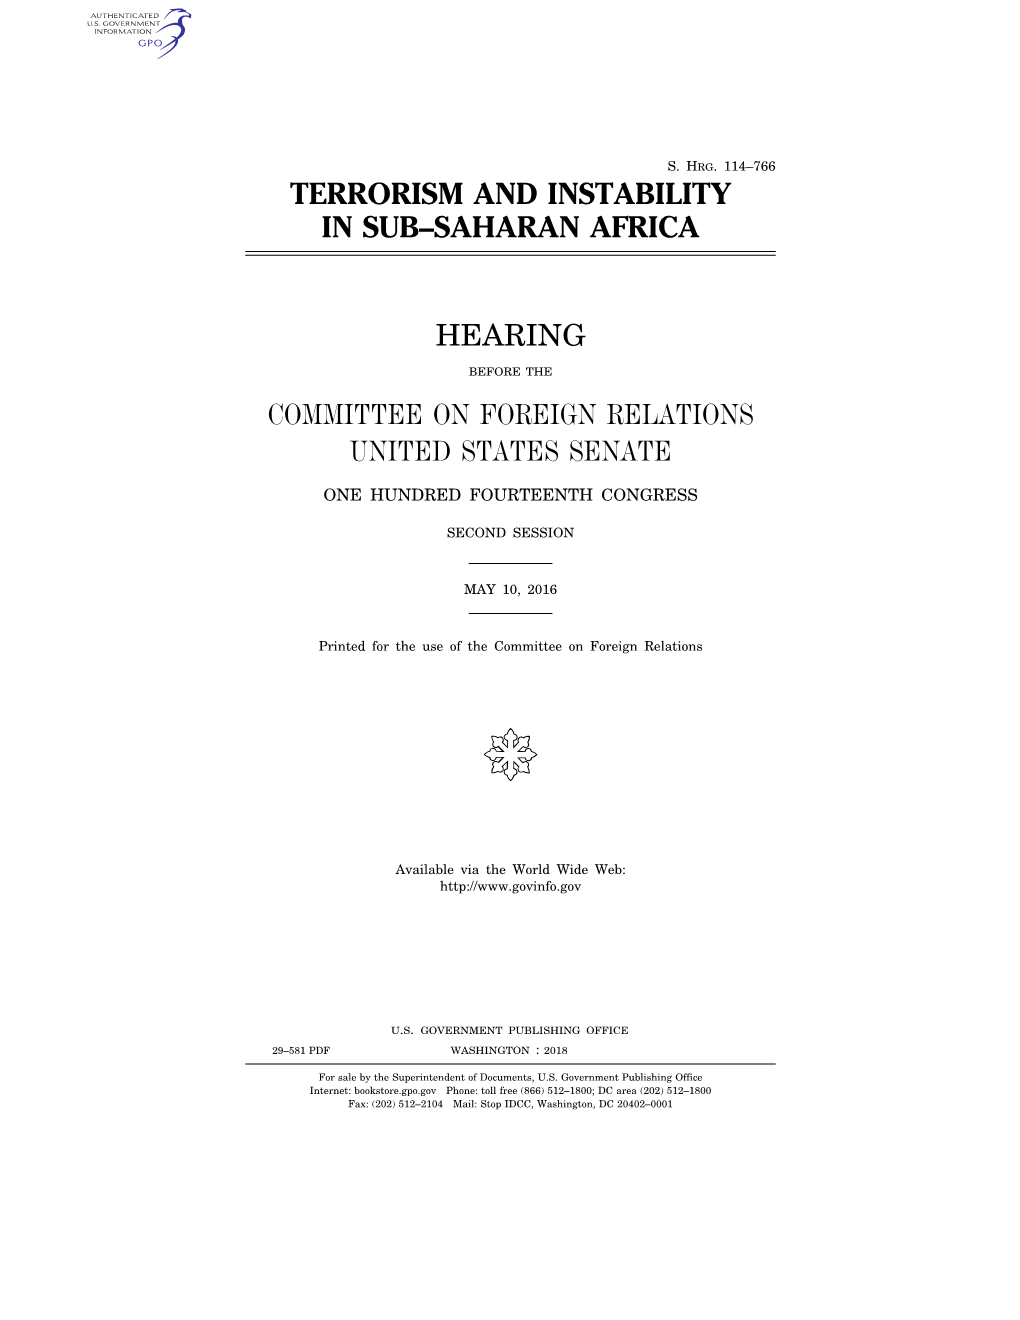 Terrorism and Instability in Sub–Saharan Africa